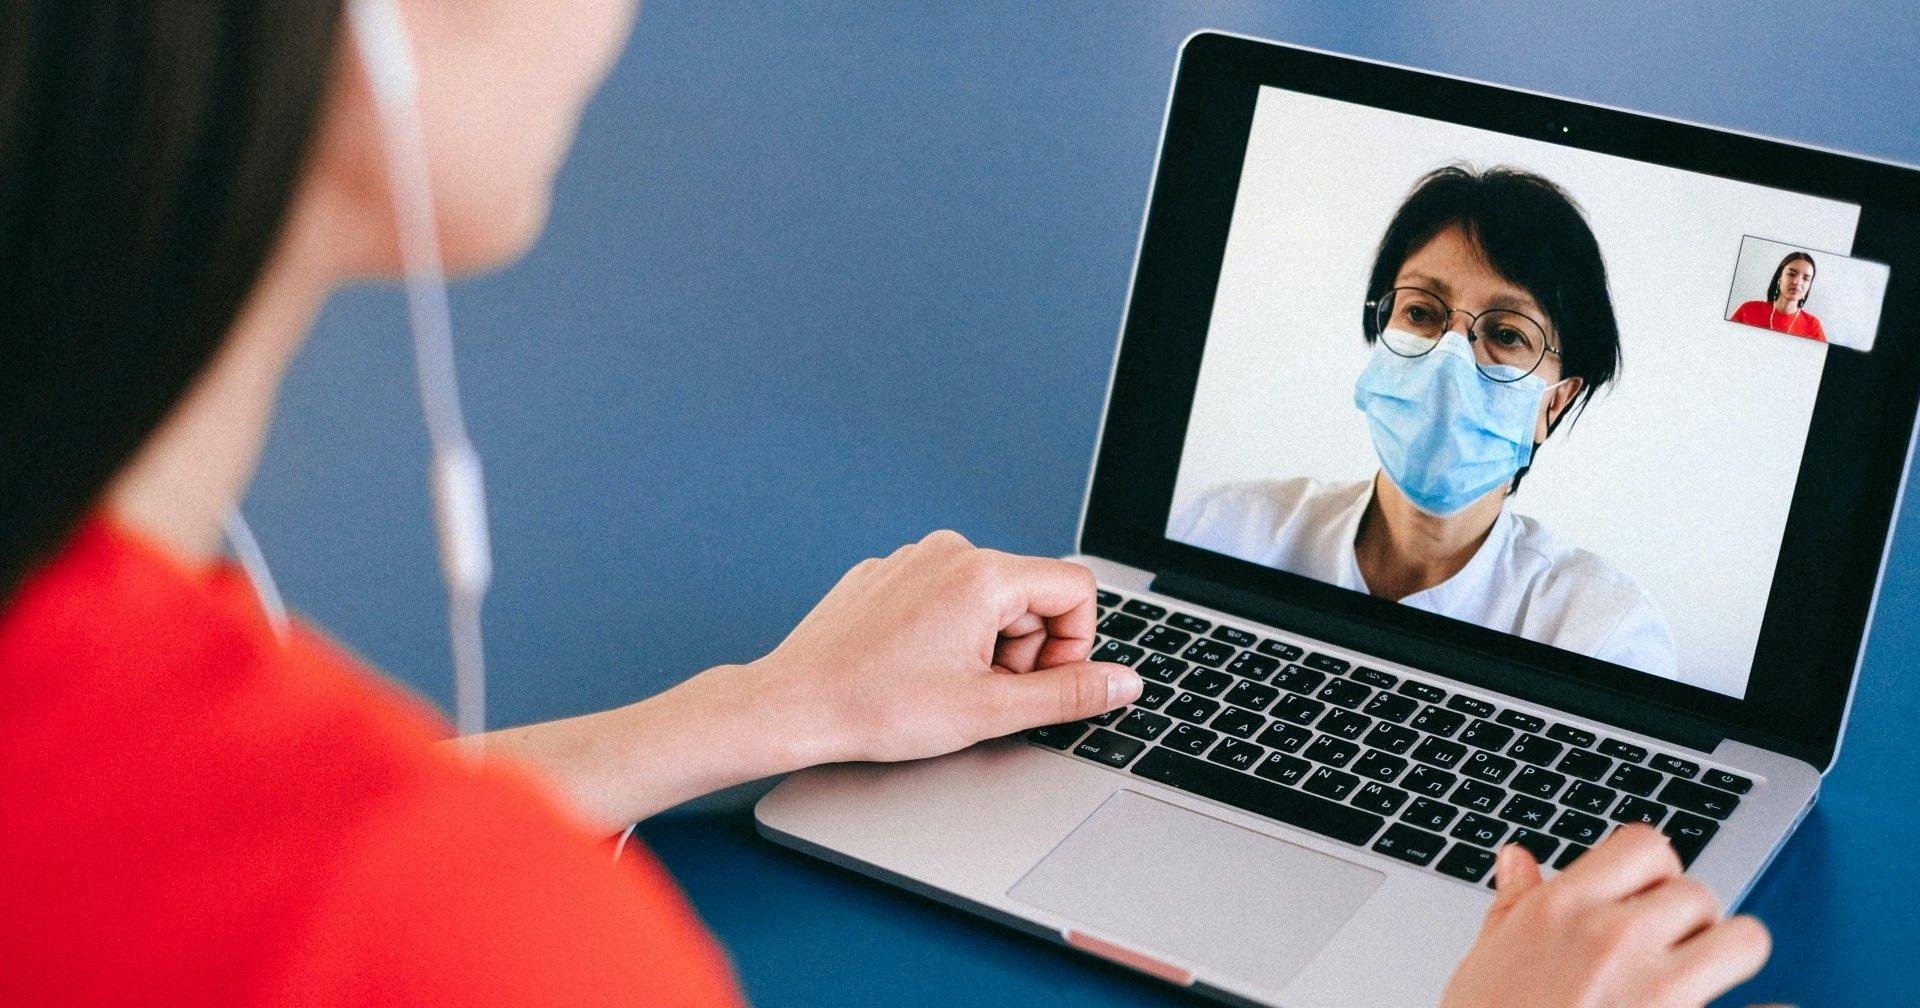 Physicians across state borders: Telehealth study could inform policy